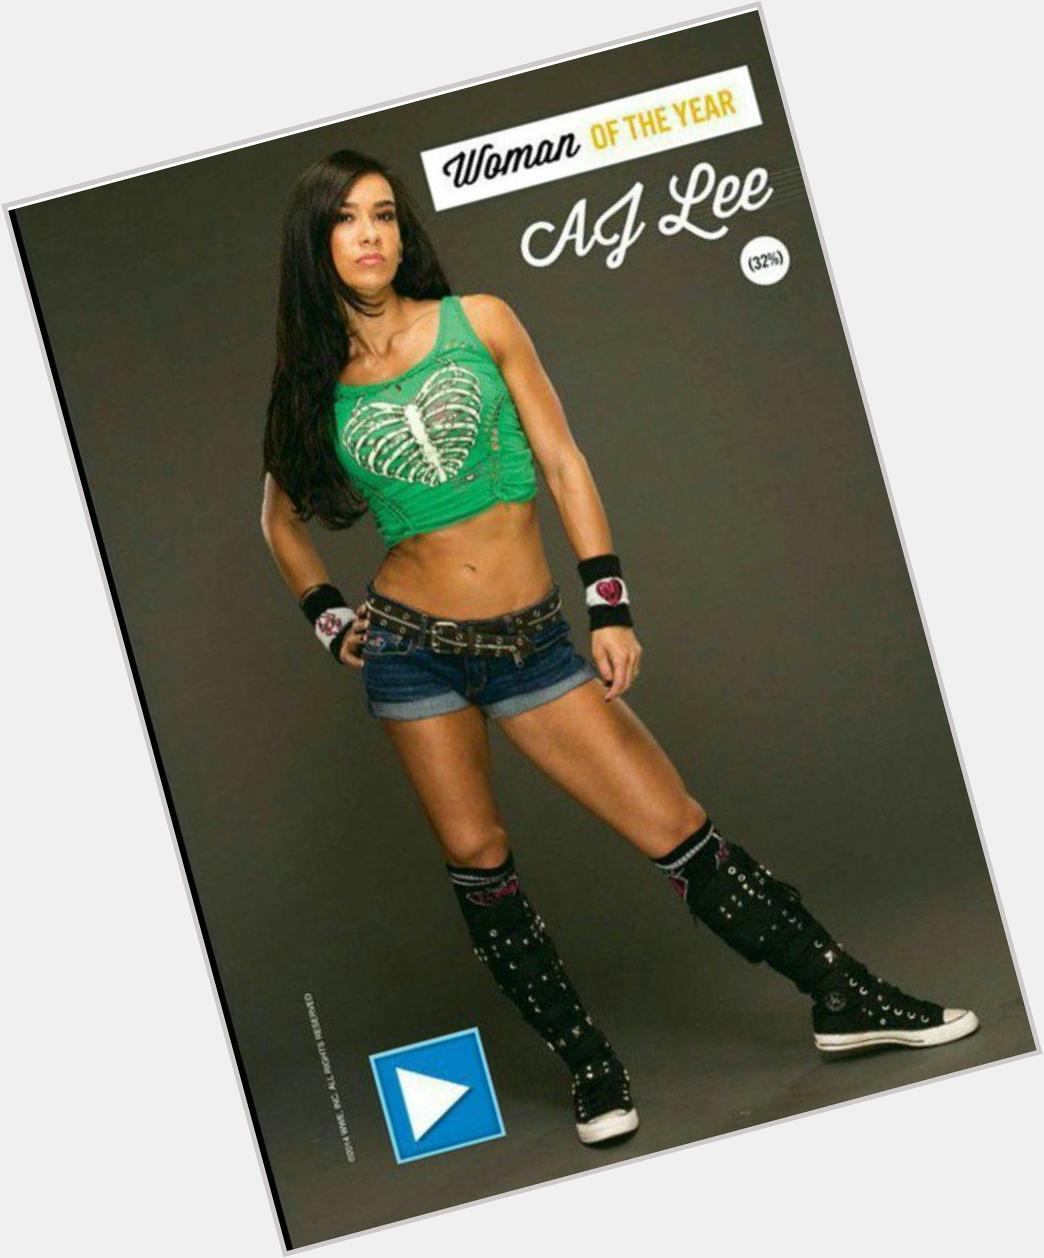 Happy bday aj lee I hope u have a very amazing bday! We love you queen 